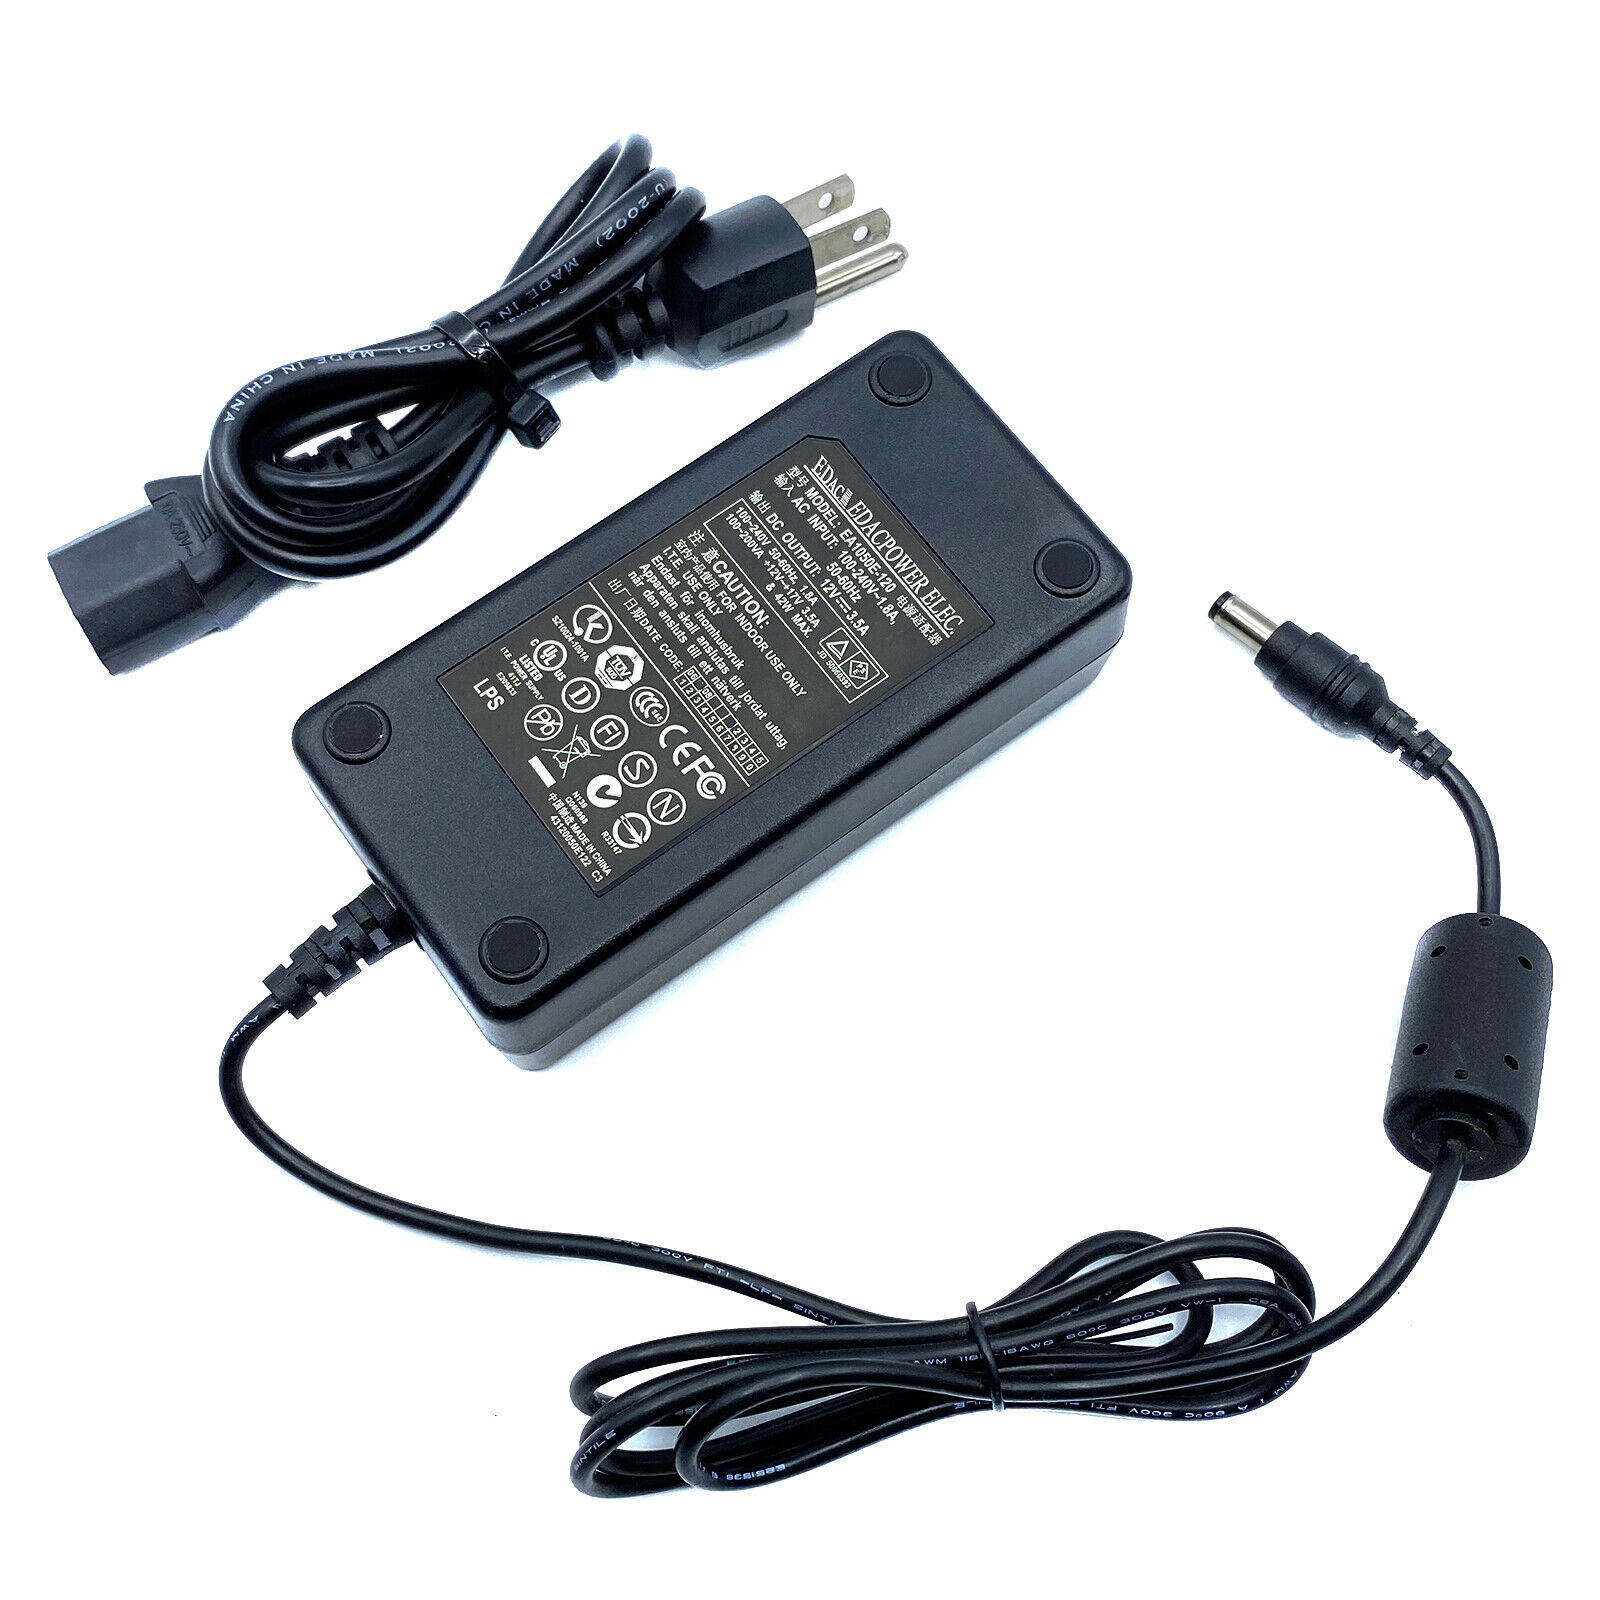 Genuine Edac AC Adapter For AG Neovo F-417 F-419 M-15 S15T LCD Monitors w/Cord